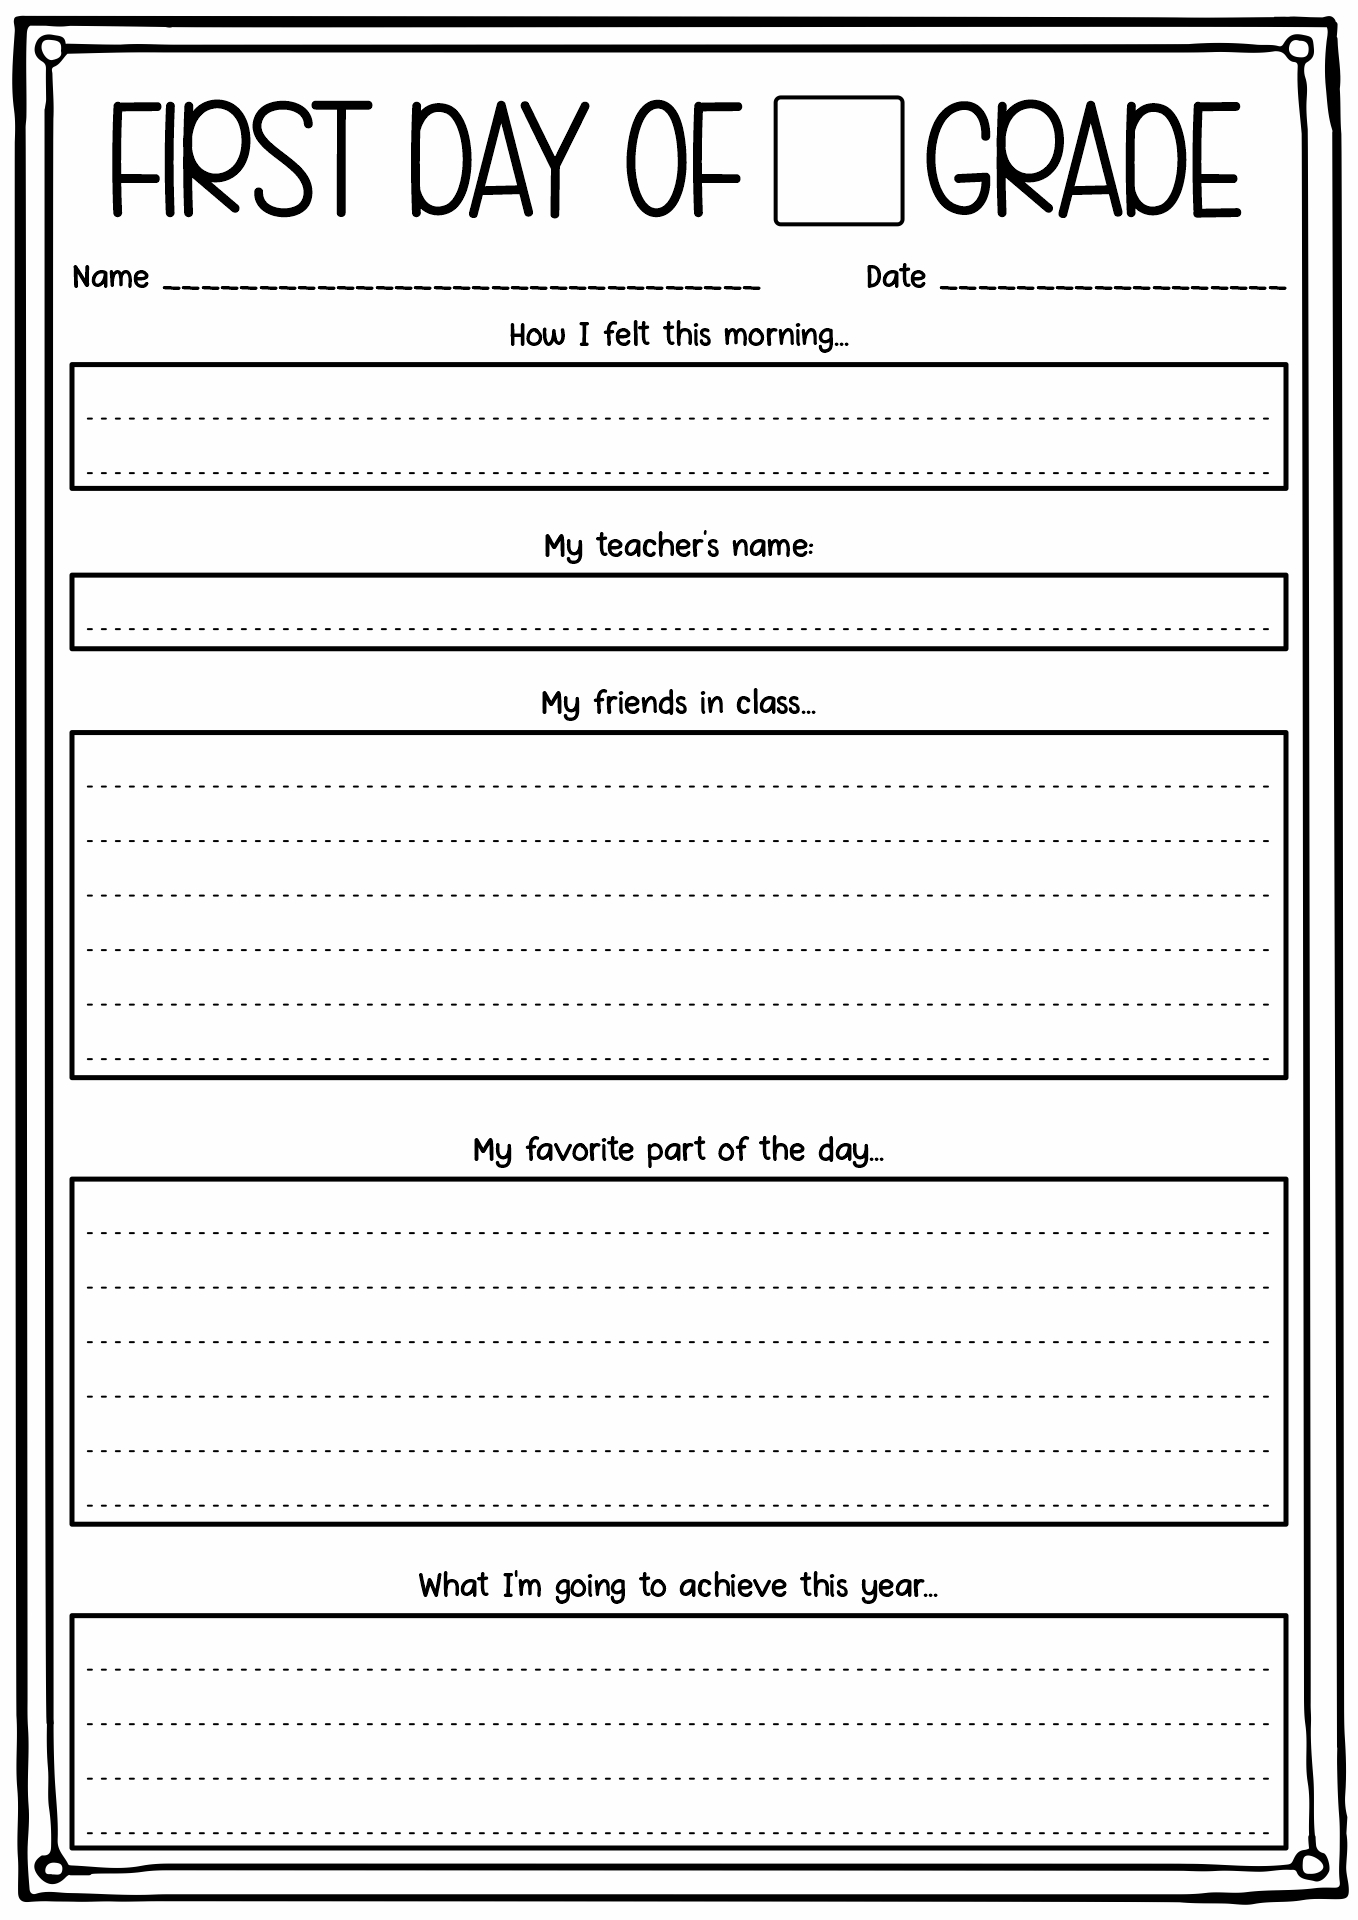 First Day High School Activities Worksheets Image